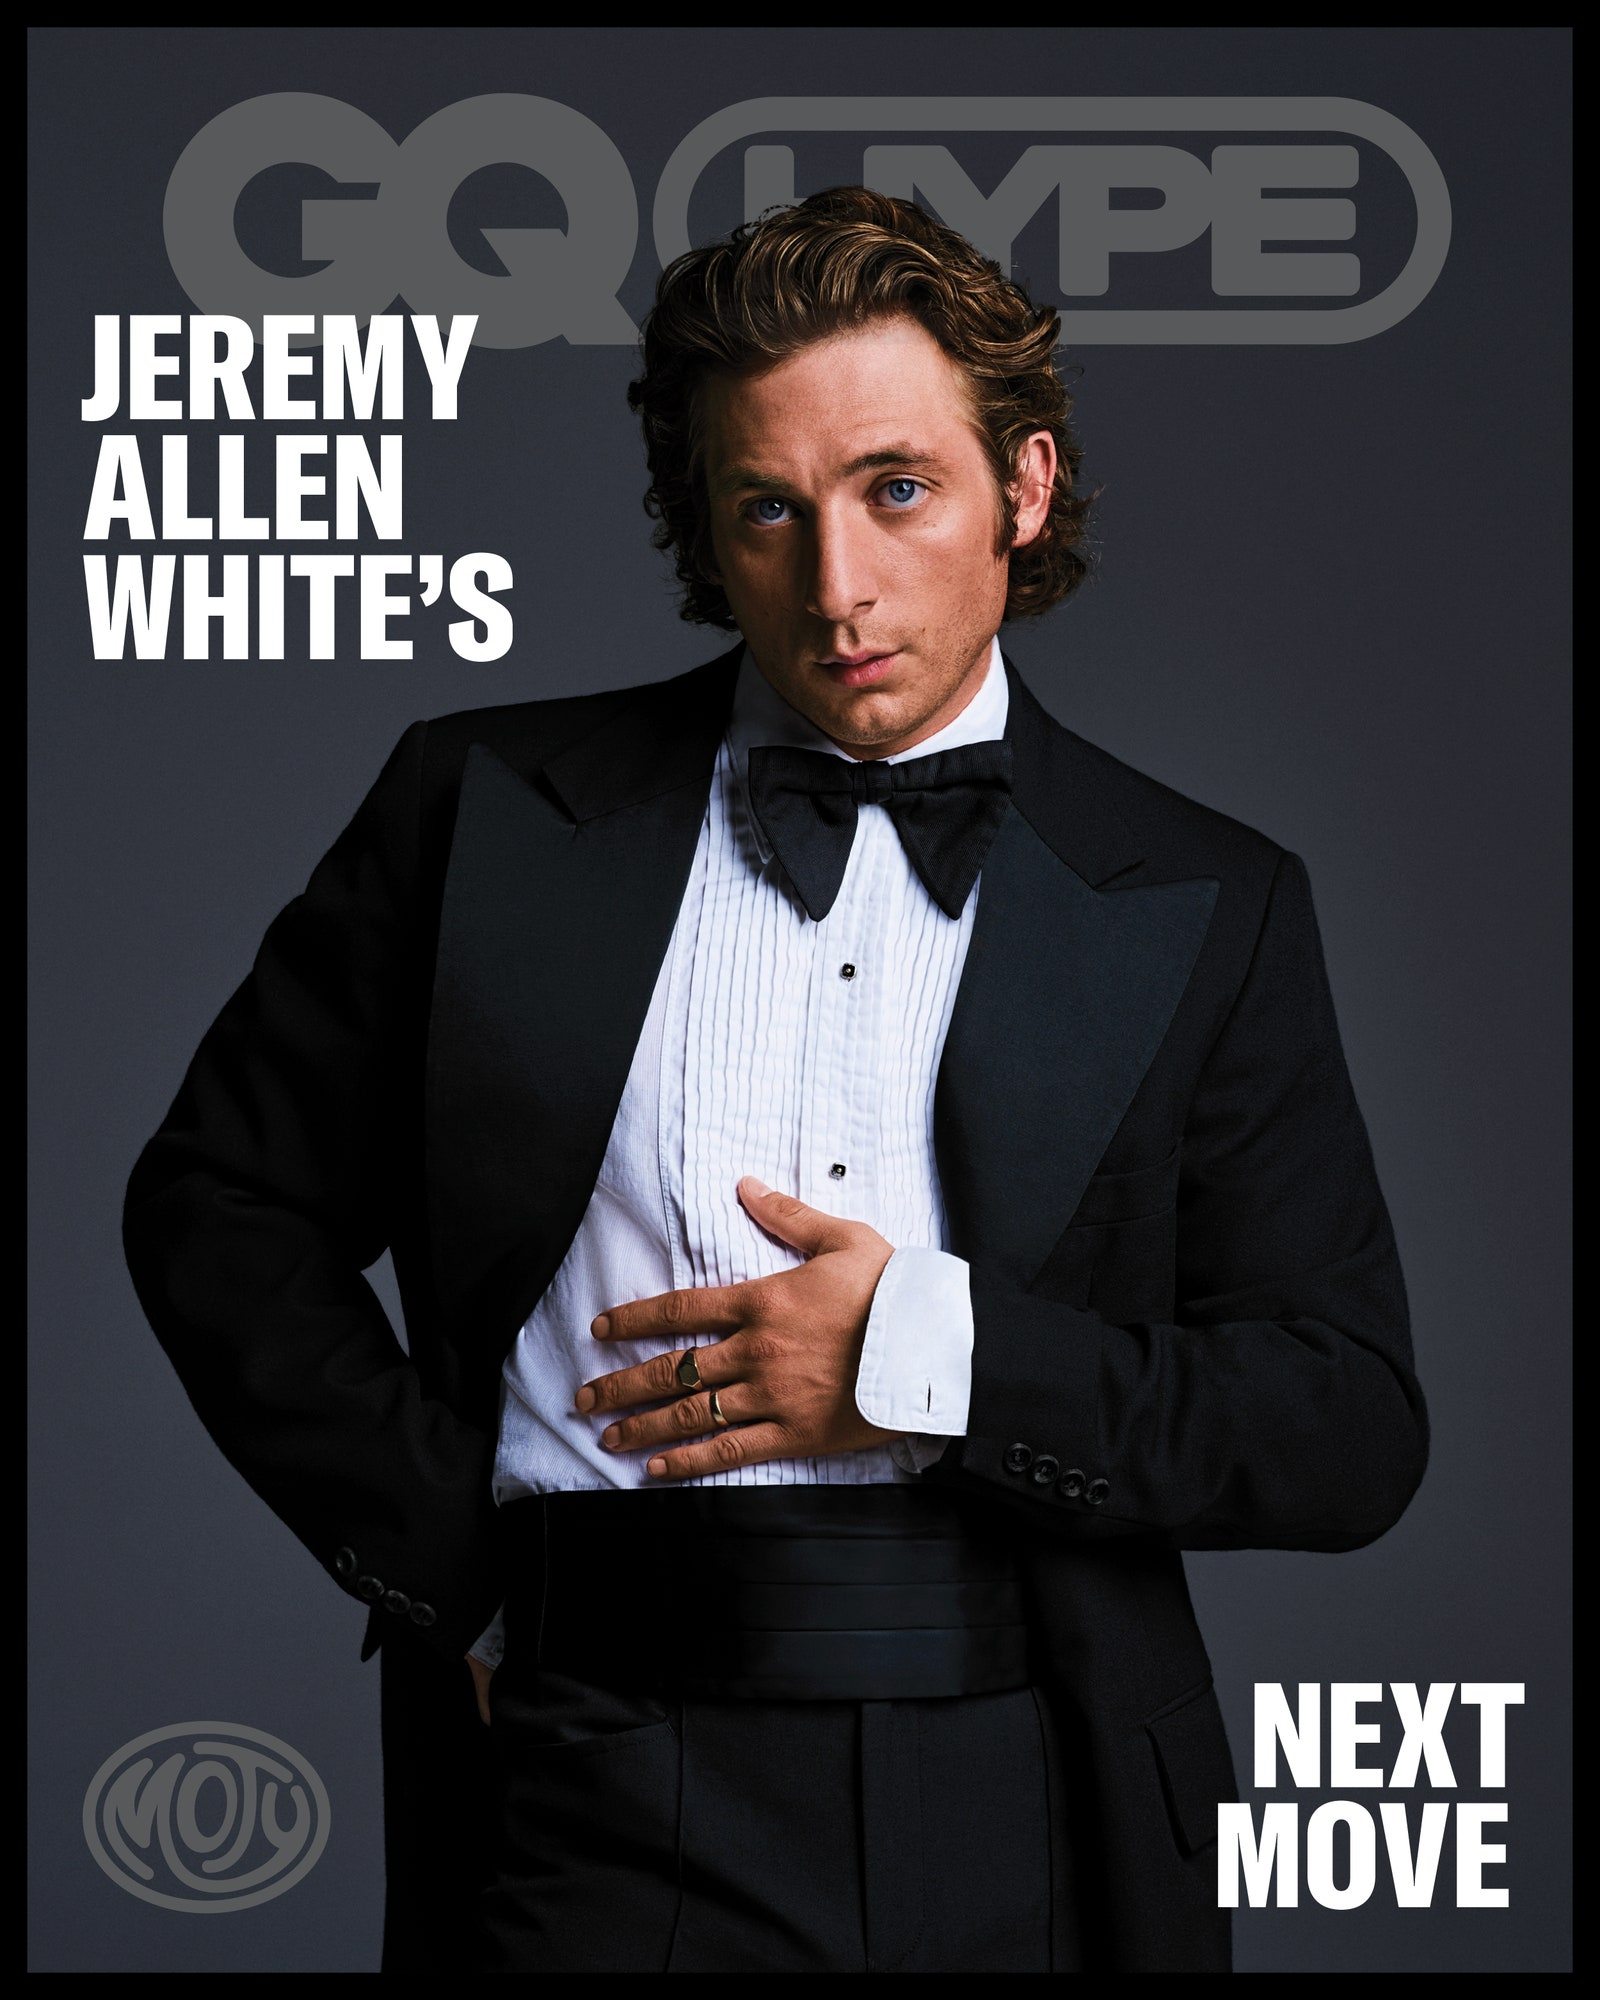 WHAT'S NEXT FOR JEREMY ALLEN WHITE? 